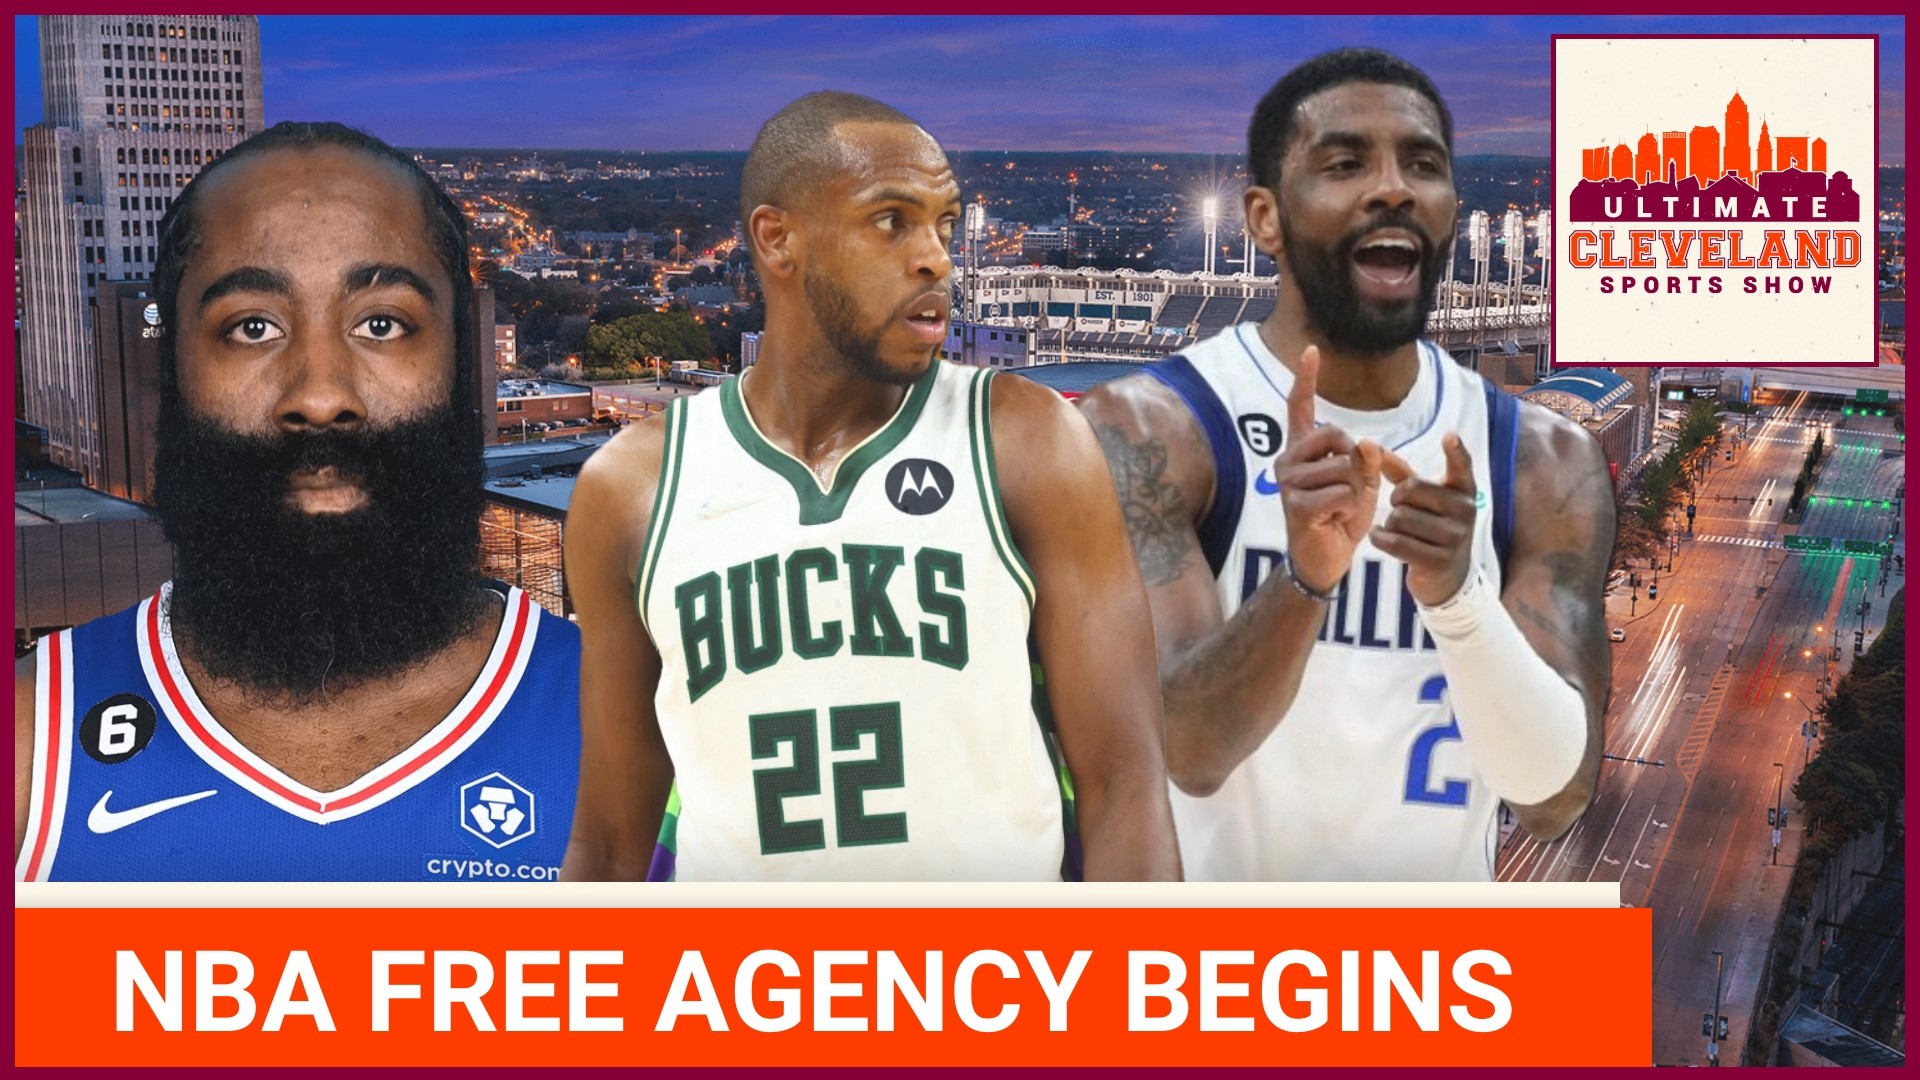 NBA Free Agency: Who are the best players still available for